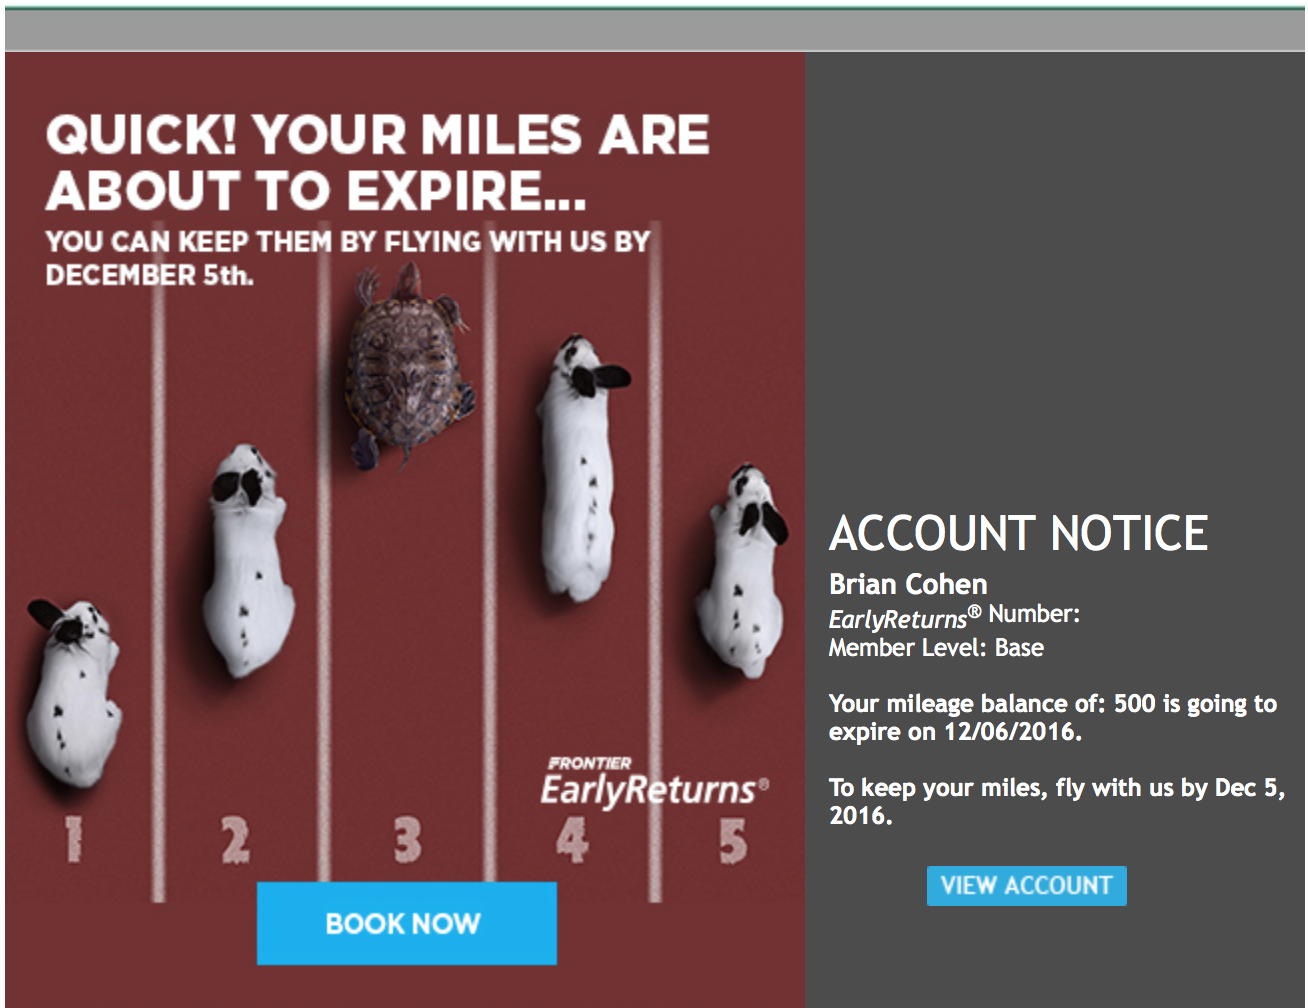 500 EarlyReturns miles about to expire